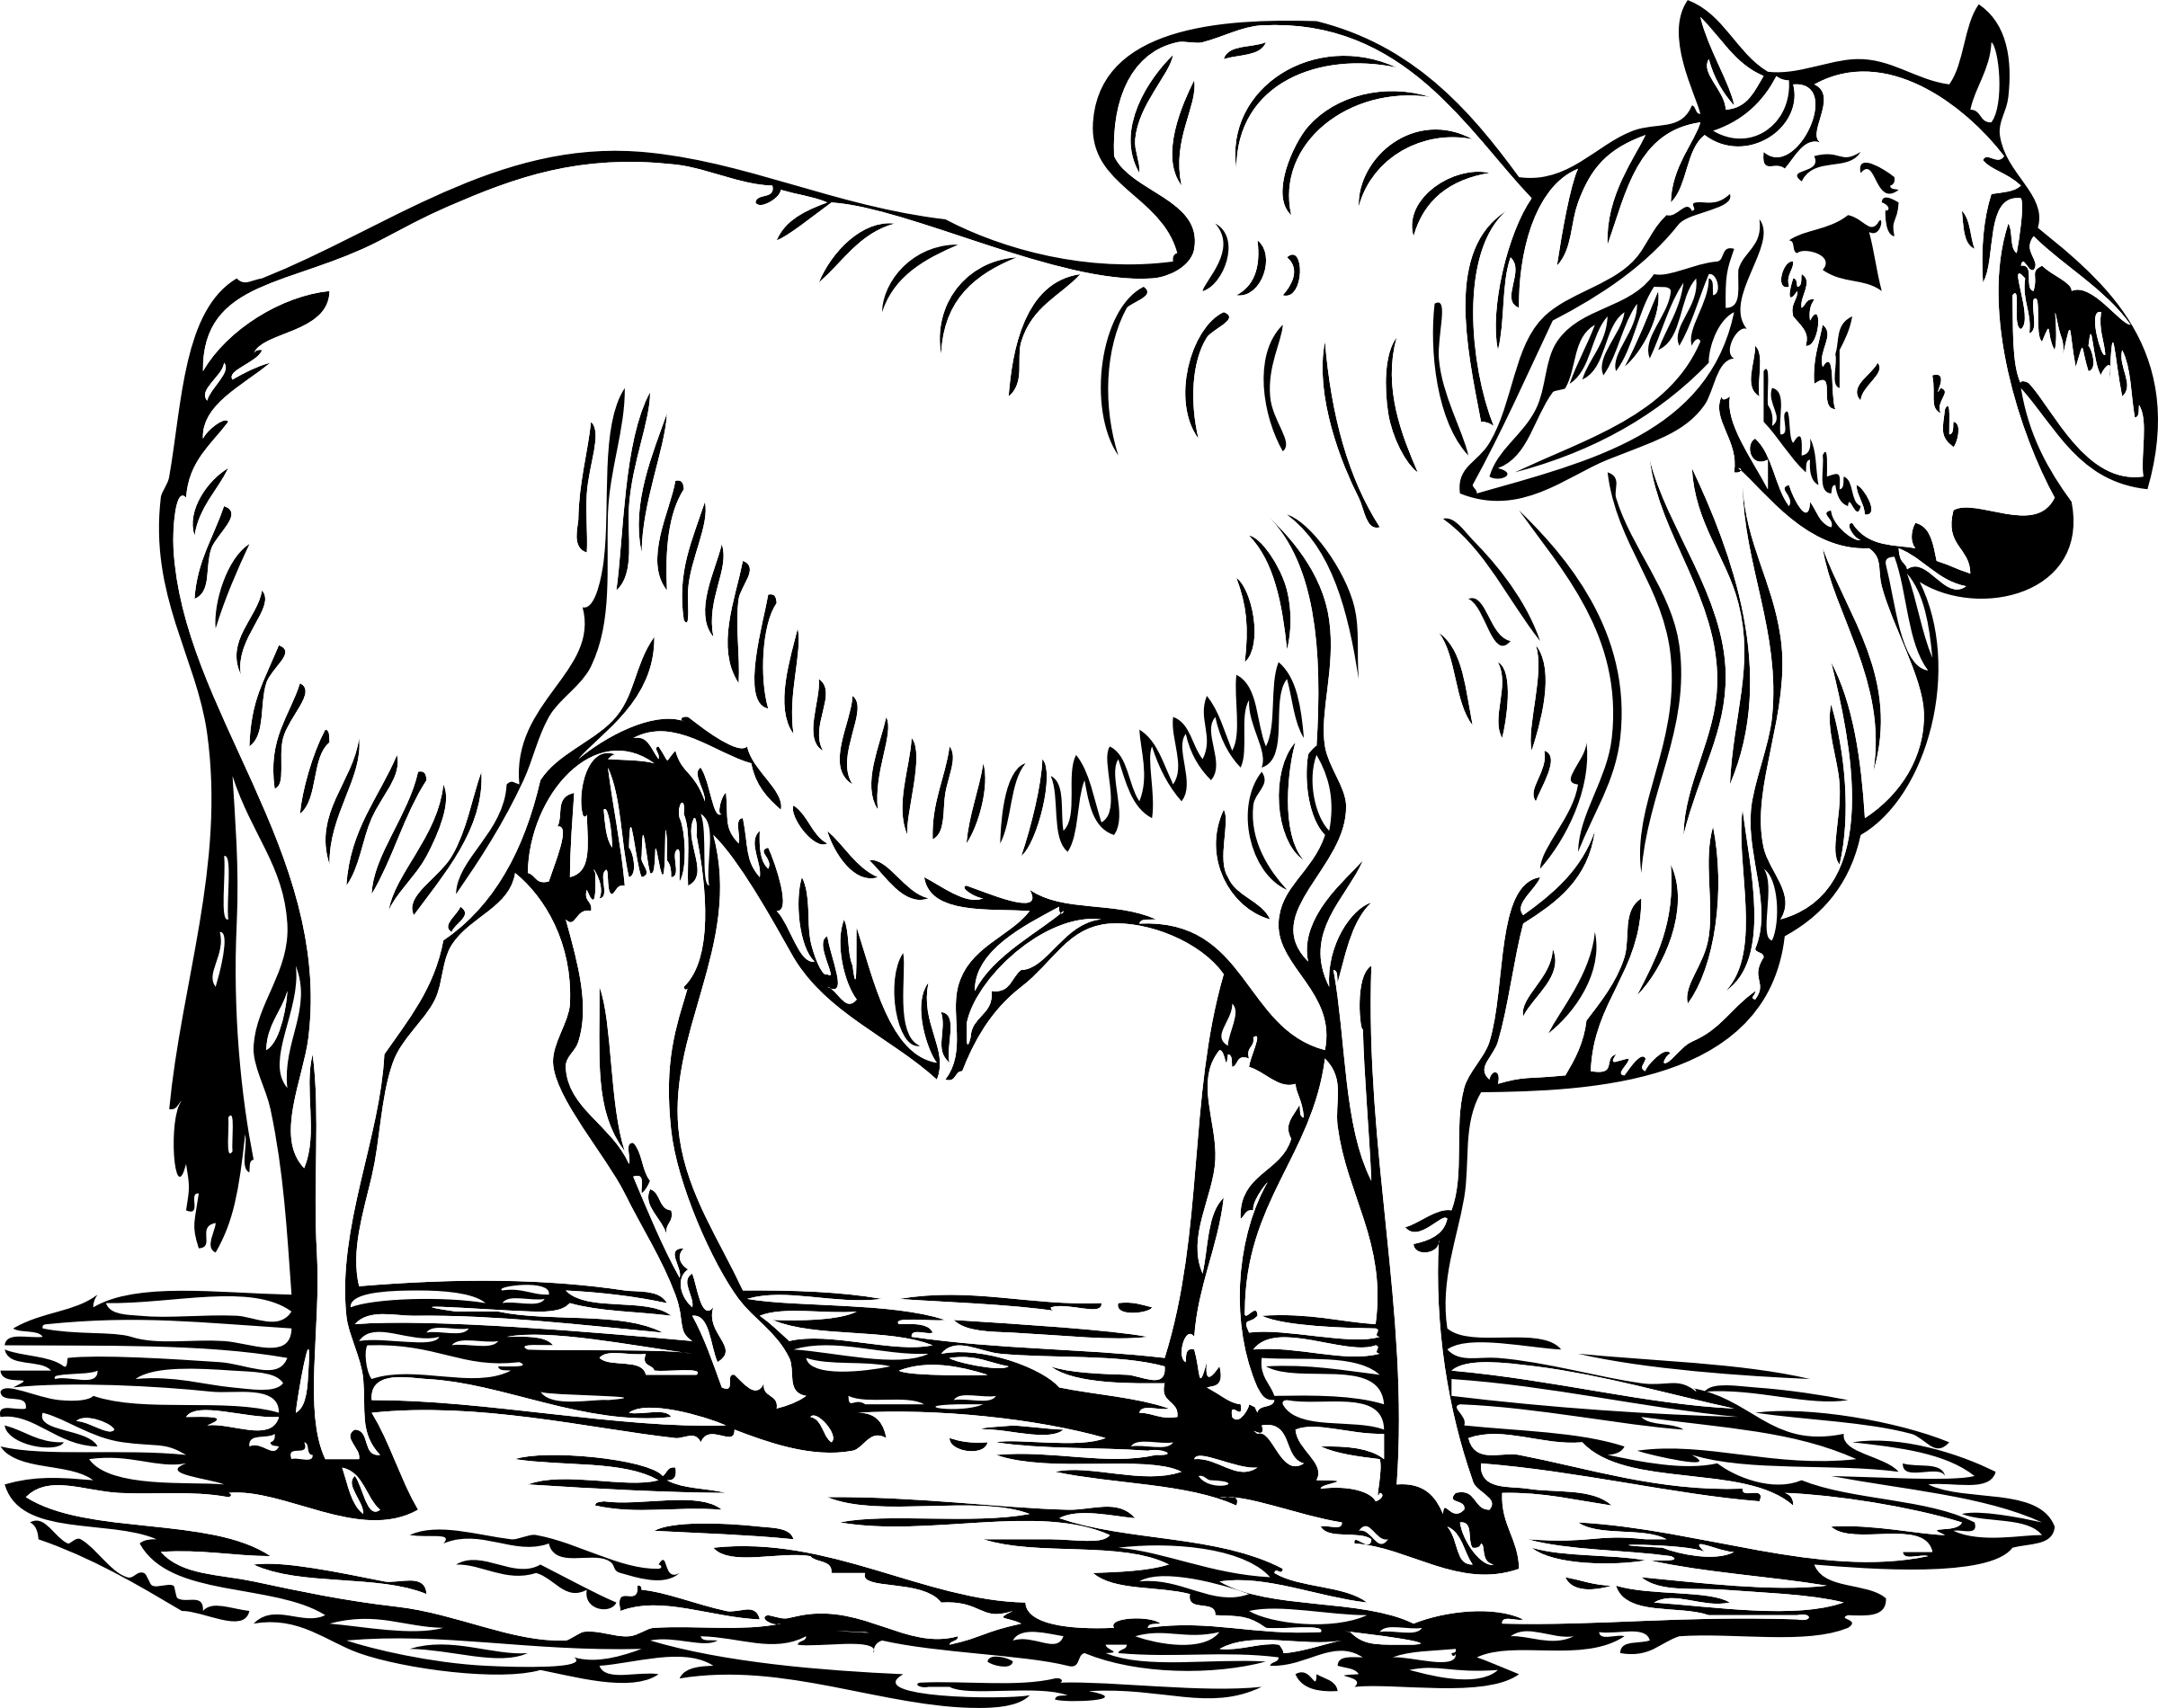 This Free Icons Png Design Of Brahma Bull